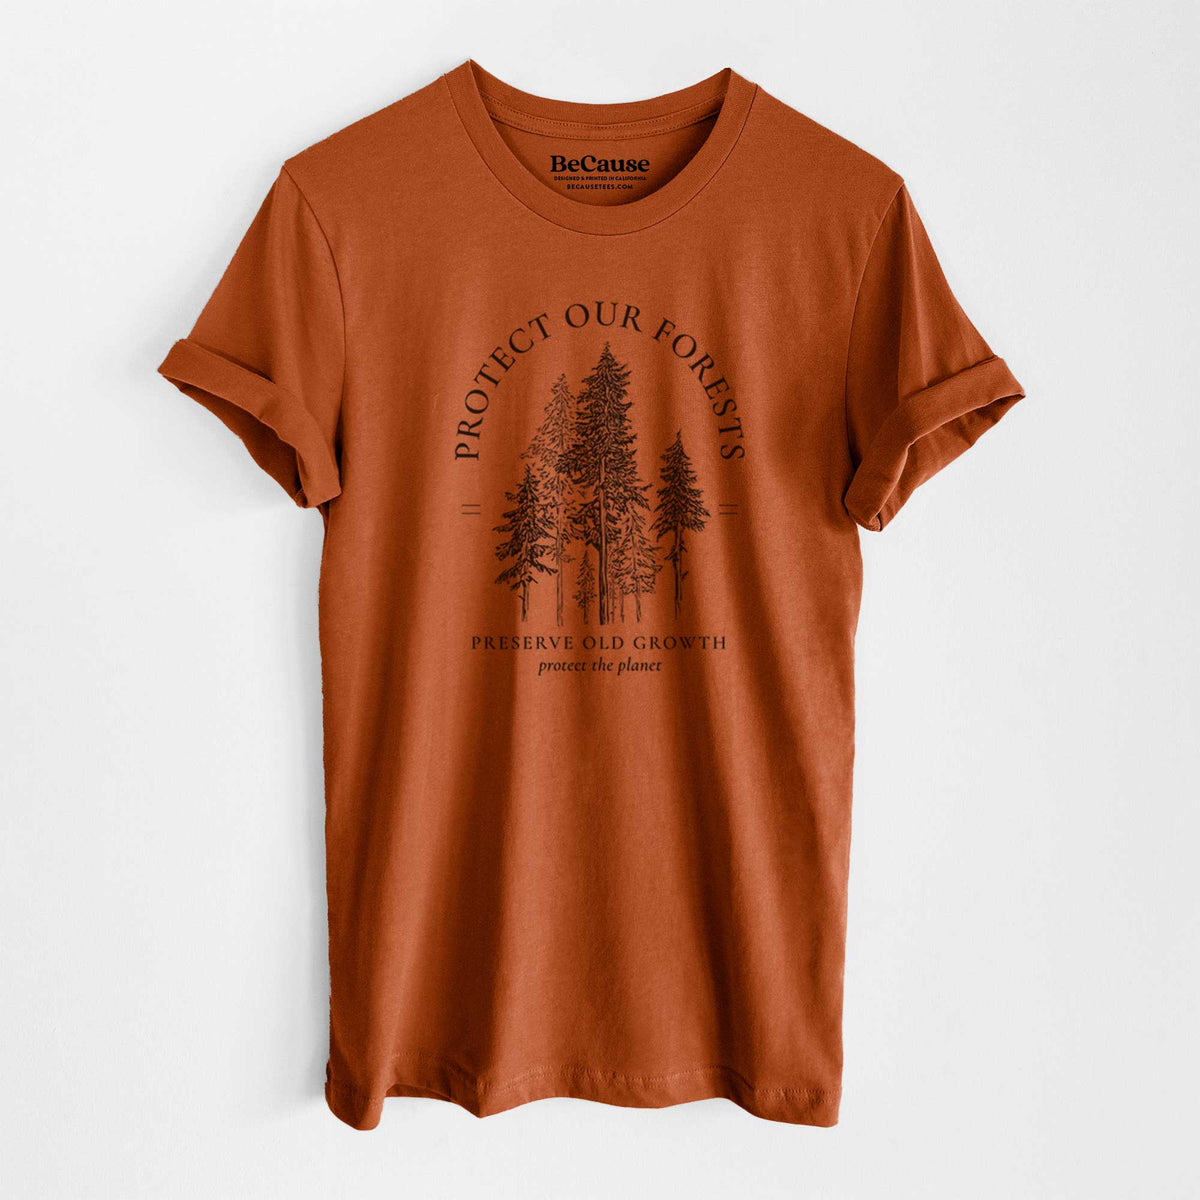 Protect our Forests - Preserve Old Growth - Lightweight 100% Cotton Unisex Crewneck